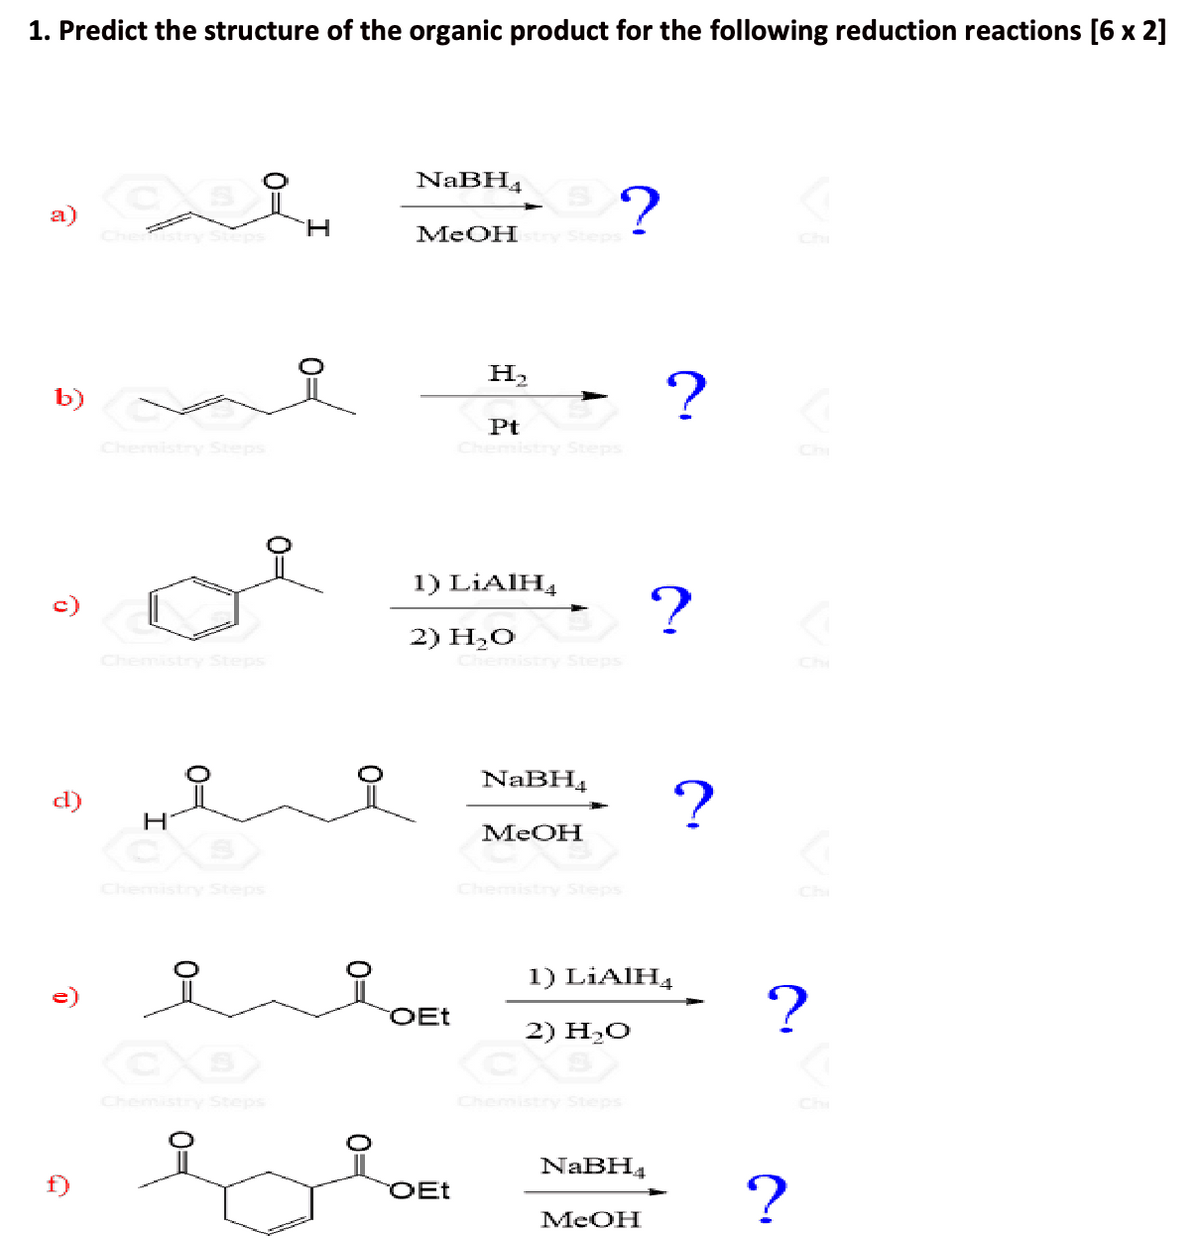 1. Predict the structure of the organic product for the following reduction reactions [6 x 2]
a)
요.
NaBH4
H
MeOHstry Steps
Chi
Cheps
b)
Chemistry Steps
H₂
Pt
Chemistry Steps
?
Chemistry Steps
1) LiAlH
2) H₂O
Chemistry Steps
?
d)
H
Chemistry Steps
NaBH4
MeOH
MeOH
Chemistry Steps
CO
Chemistry Steps
0=
1) LiAlH
OEt
2) H₂O
Chemistry Steps
NaBH4
?
A
Chi
Chi
?
OEt
?
MeOH
Chi